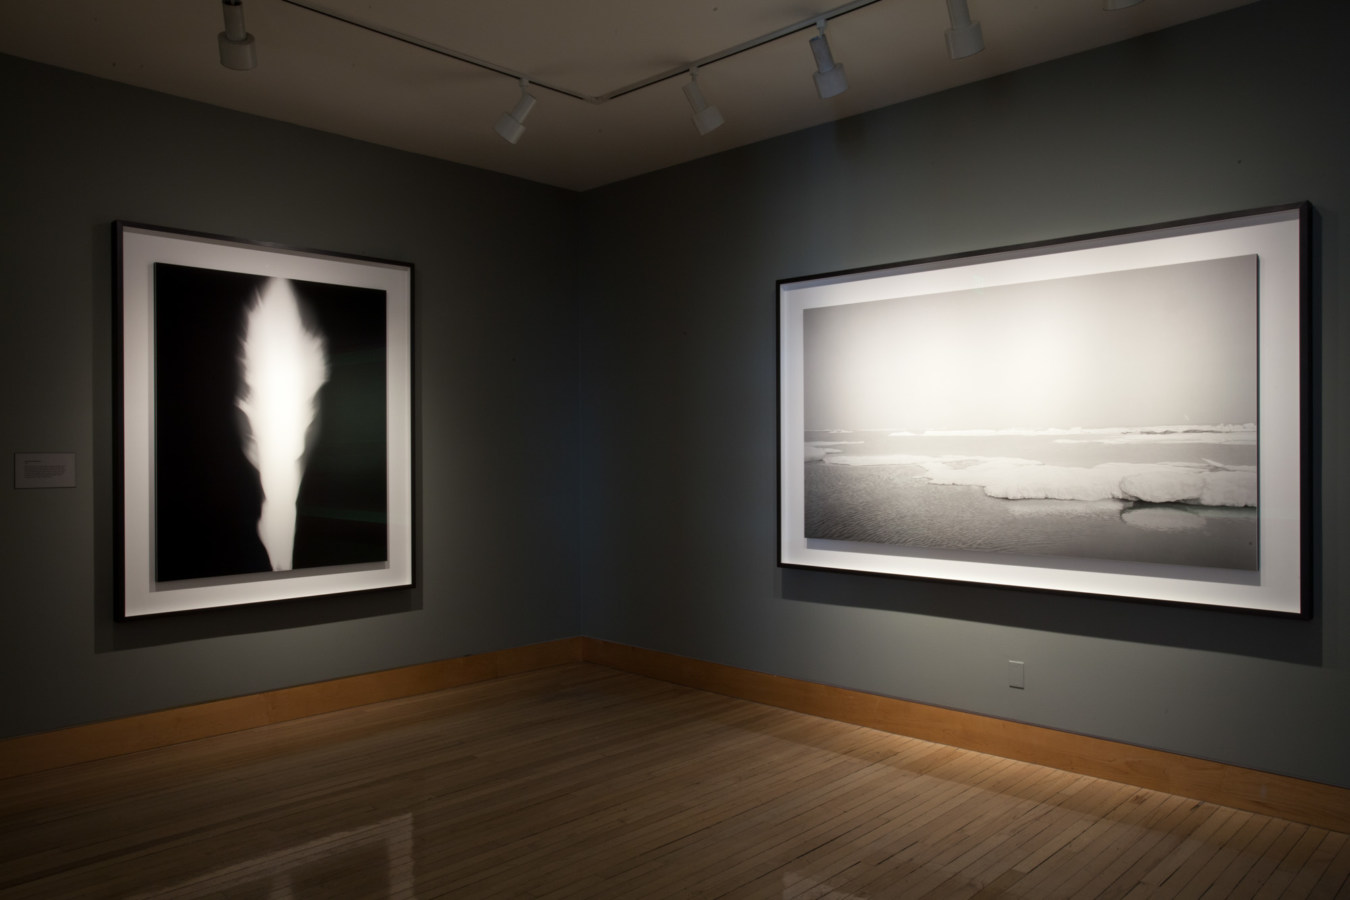 Color image of large scale framed black and white photographs on grey gallery walls